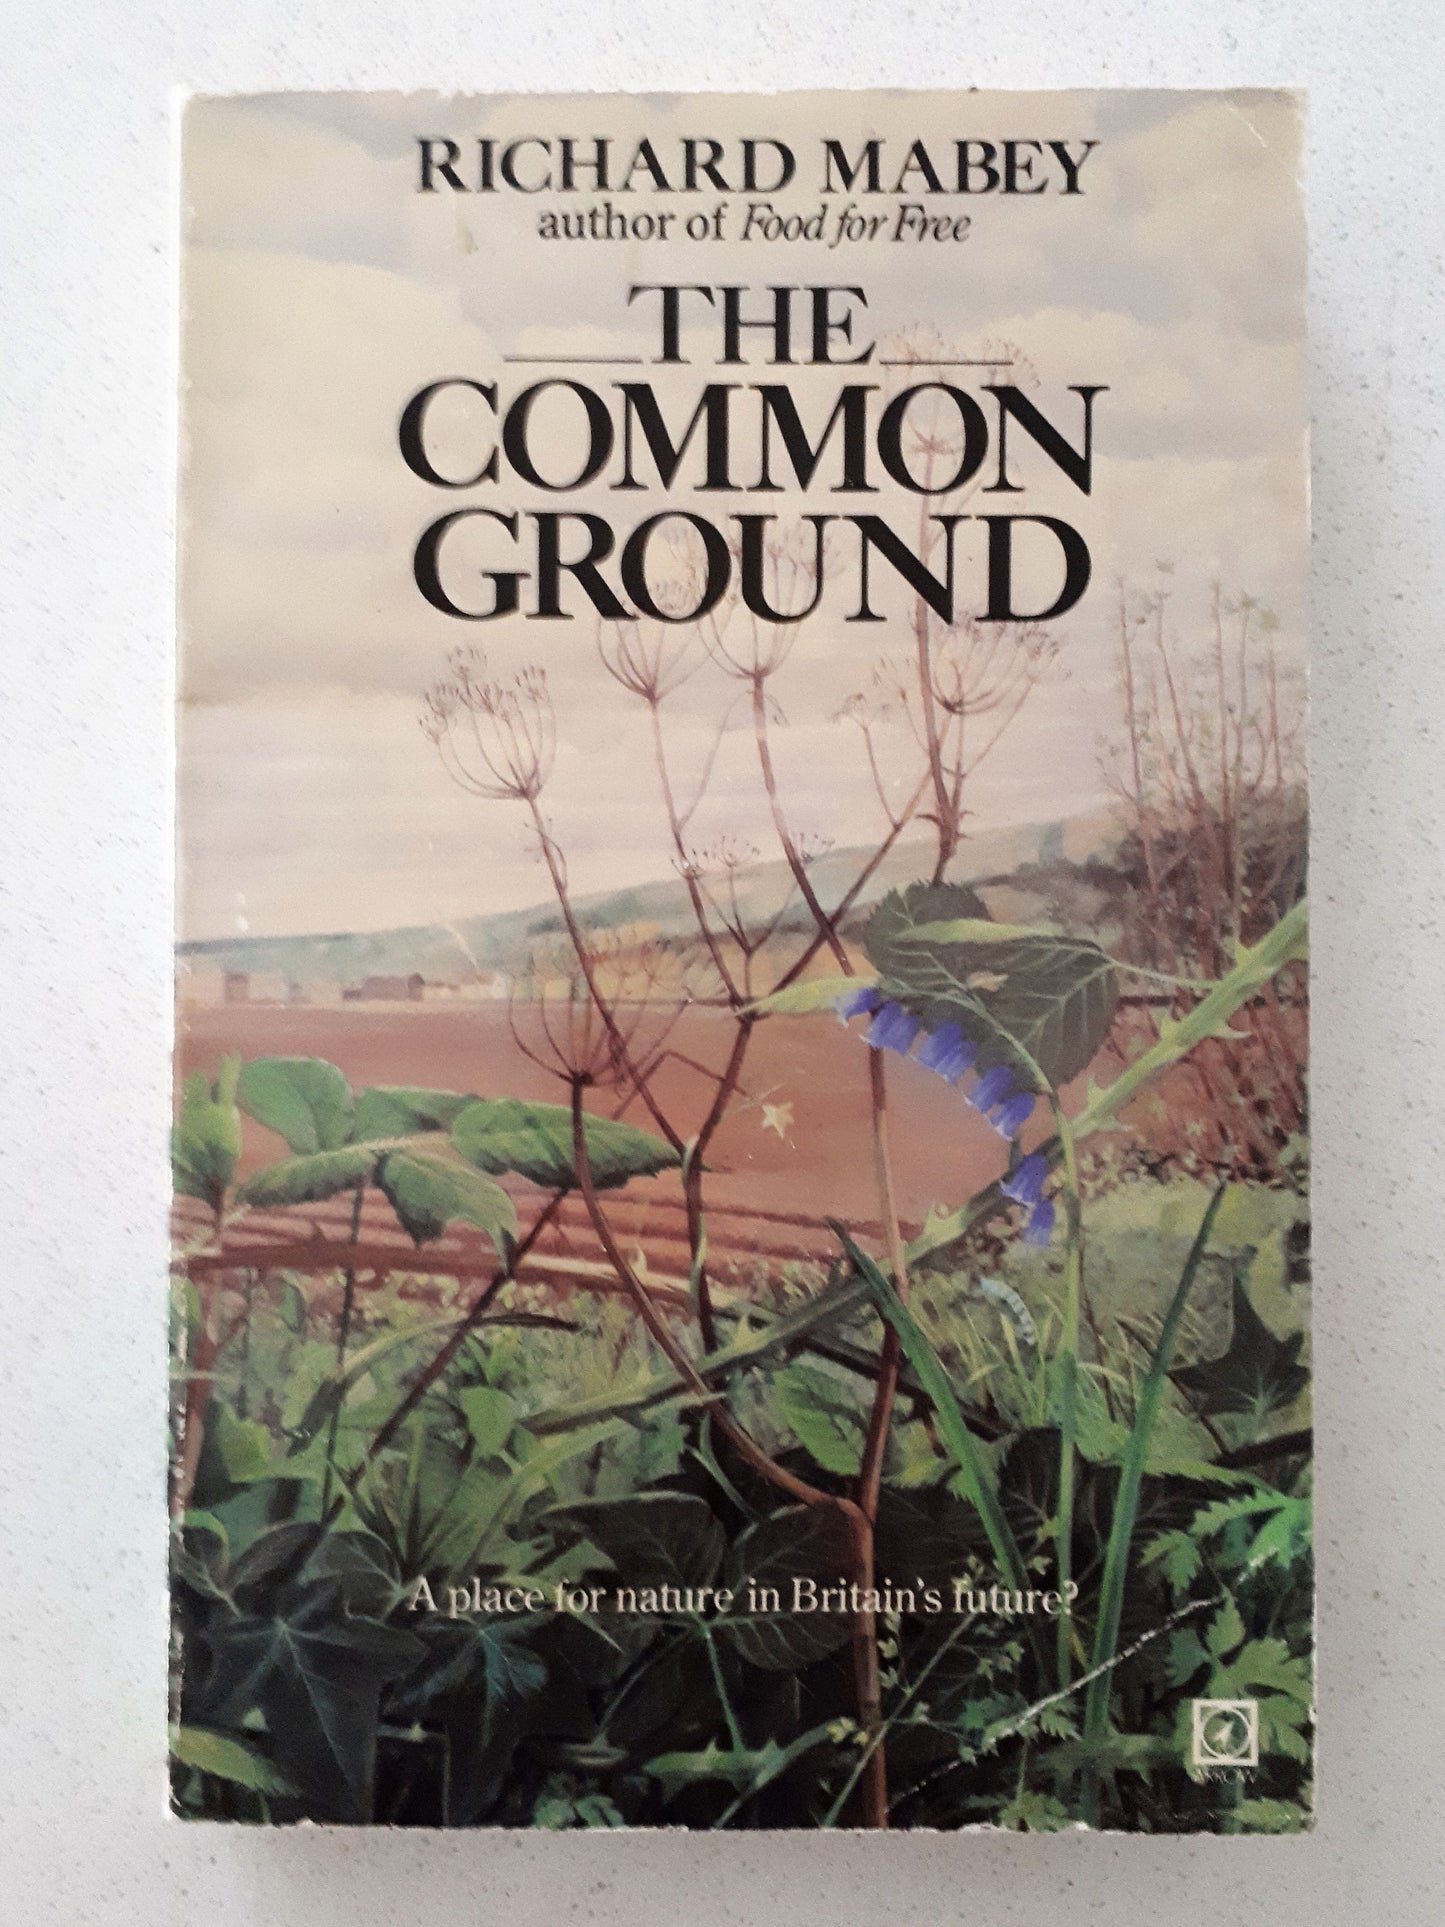 The Common Ground by Richard Mabey